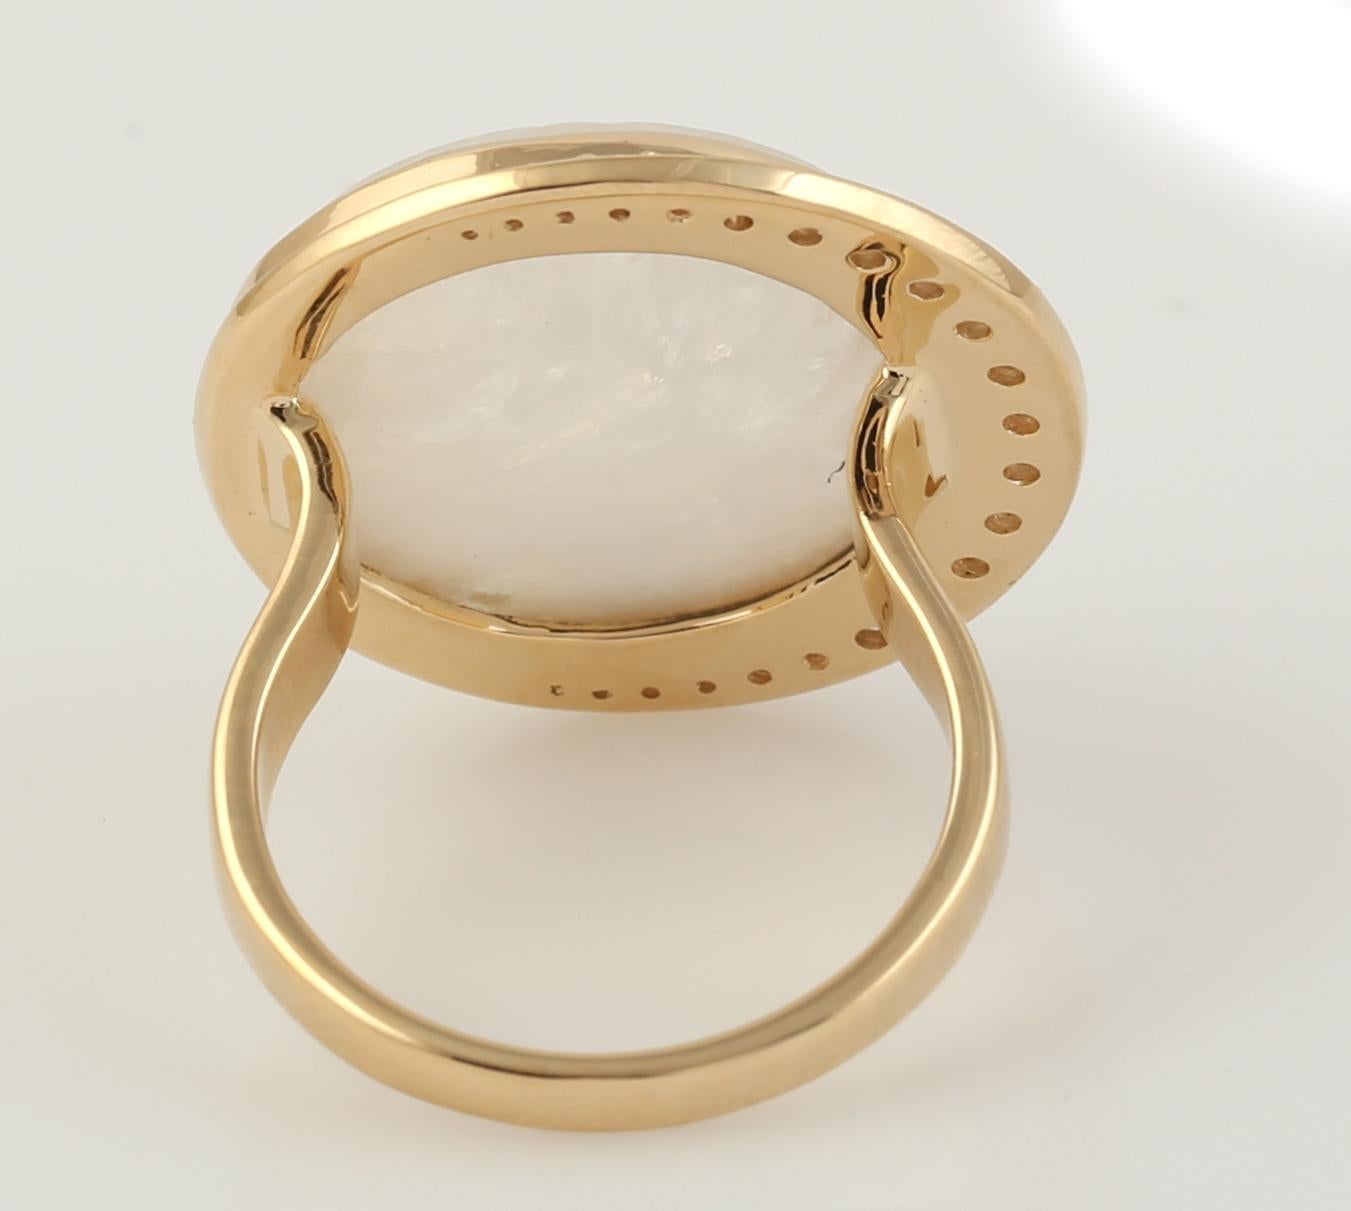 Art Nouveau 16.79 ct Moonstone Cocktail Ring With Diiamonds Made In 18k yellow Gold For Sale